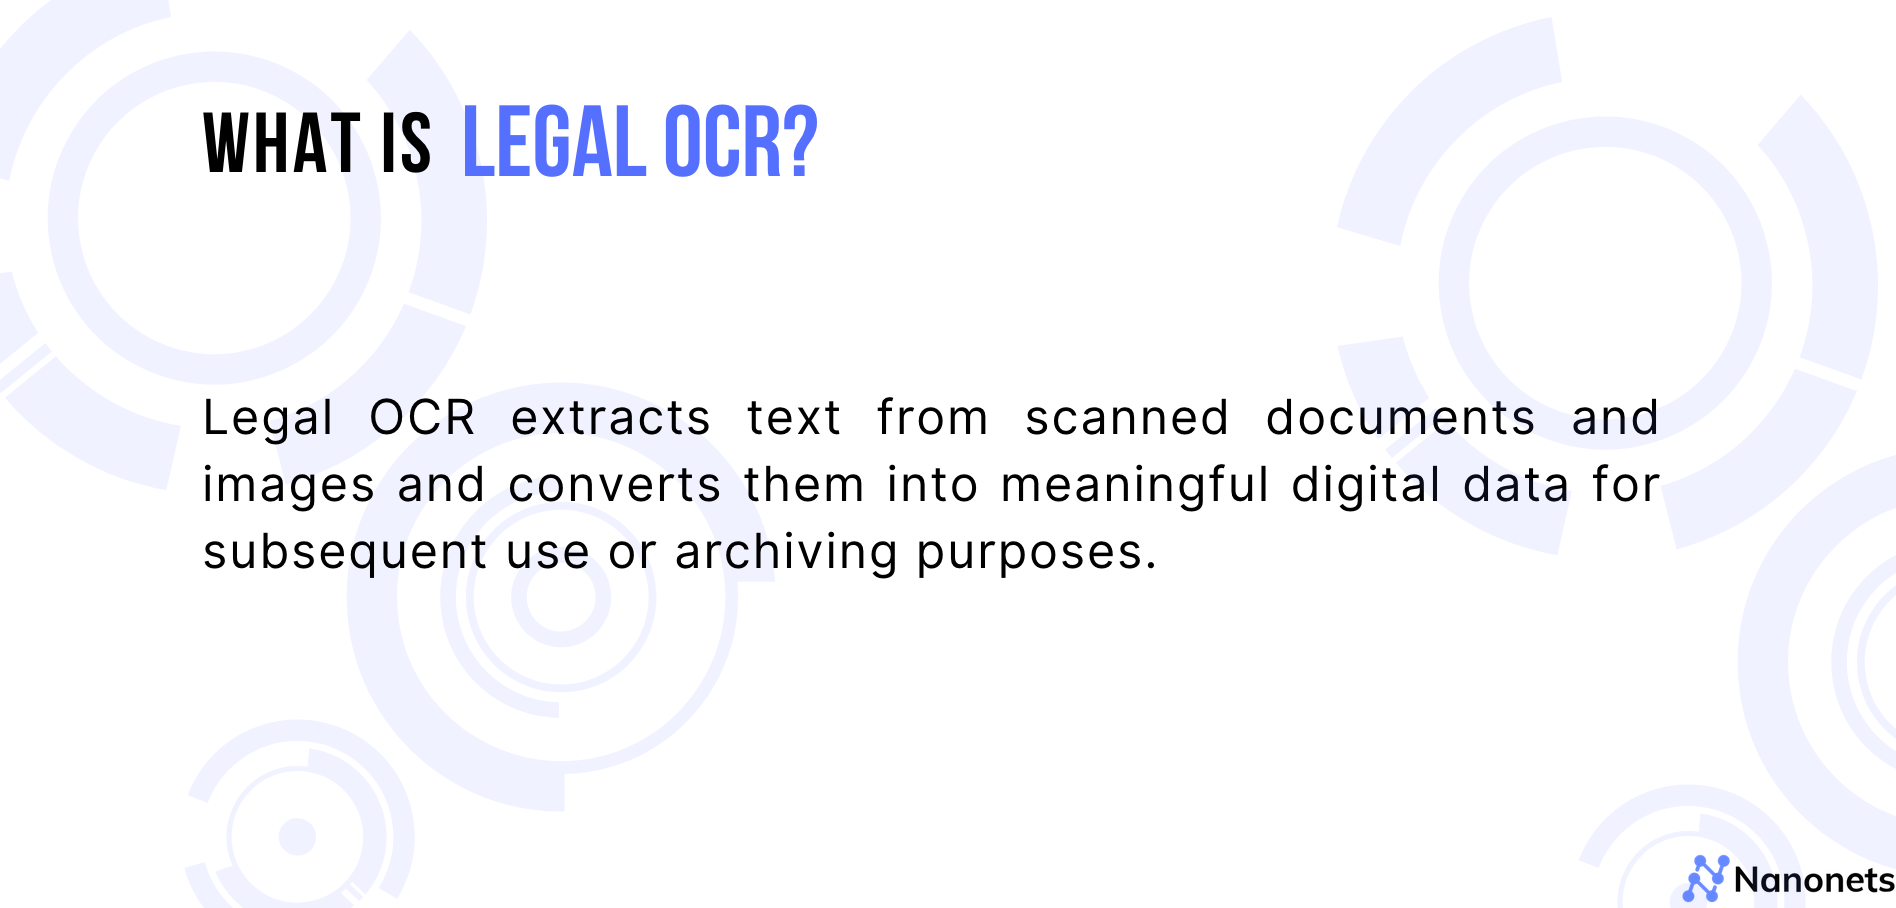 What is legal OCR?